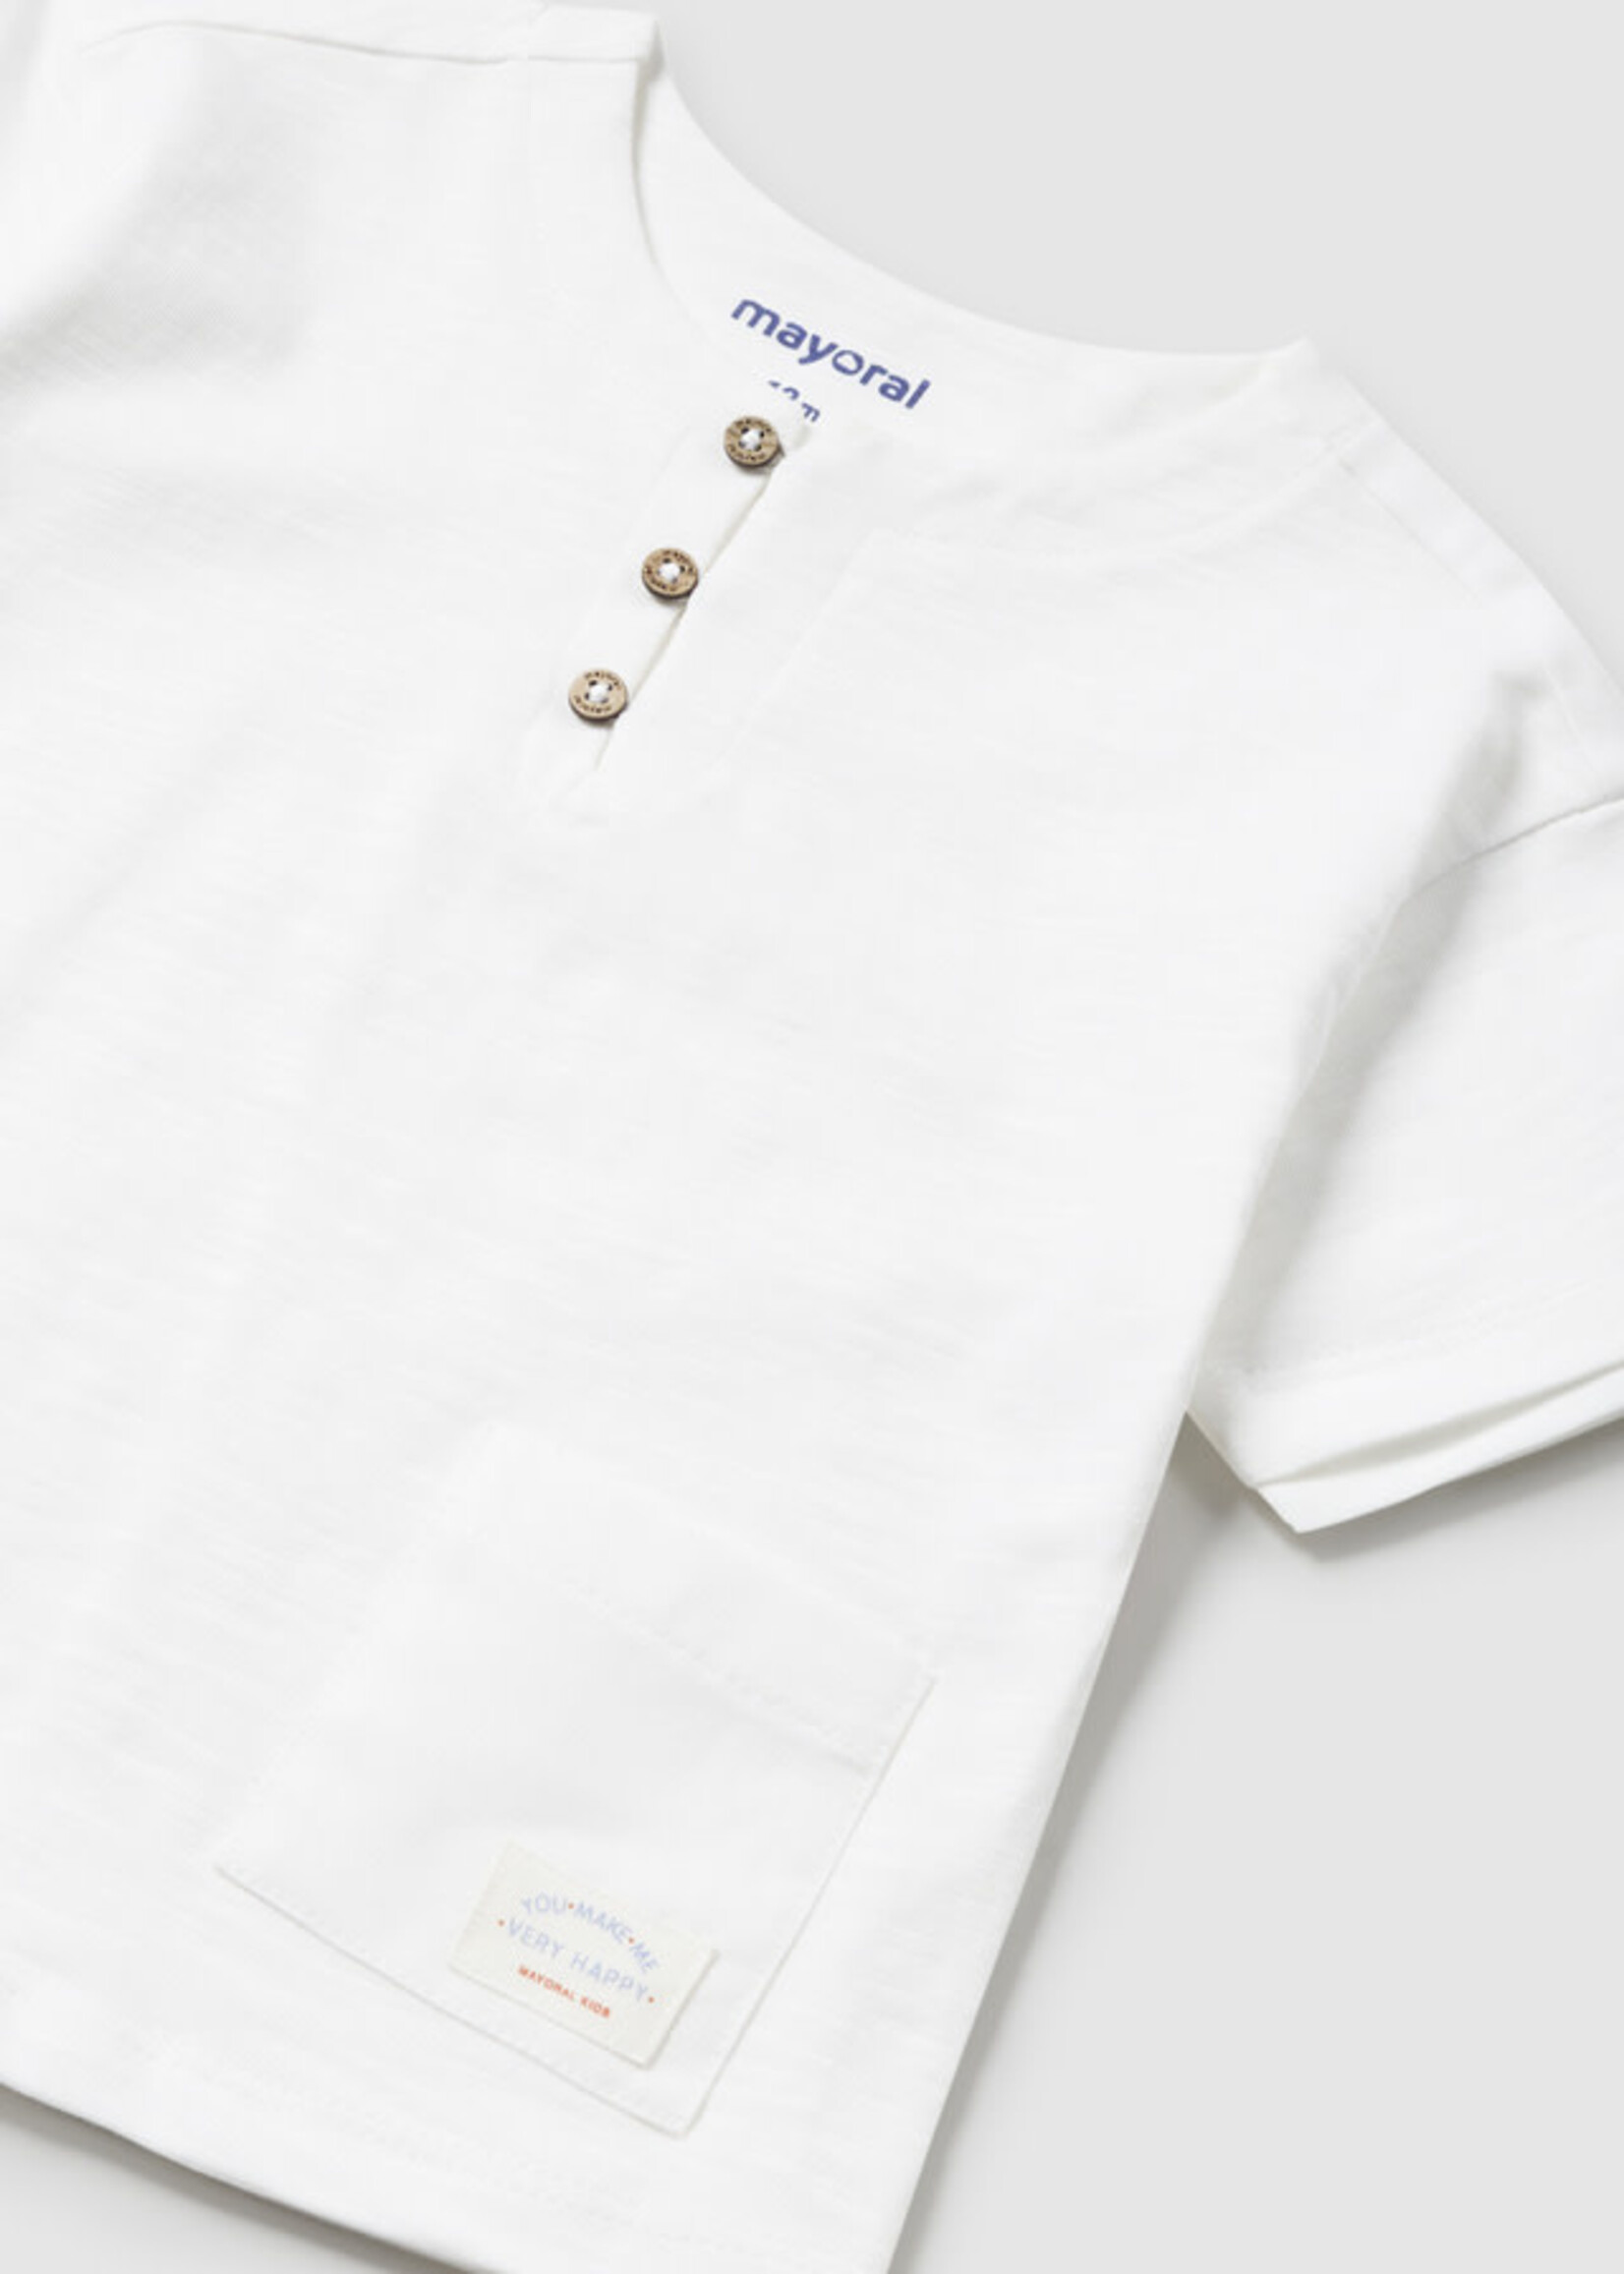 Mayoral Mayoral S/s combined linen shirt White - 24 01016